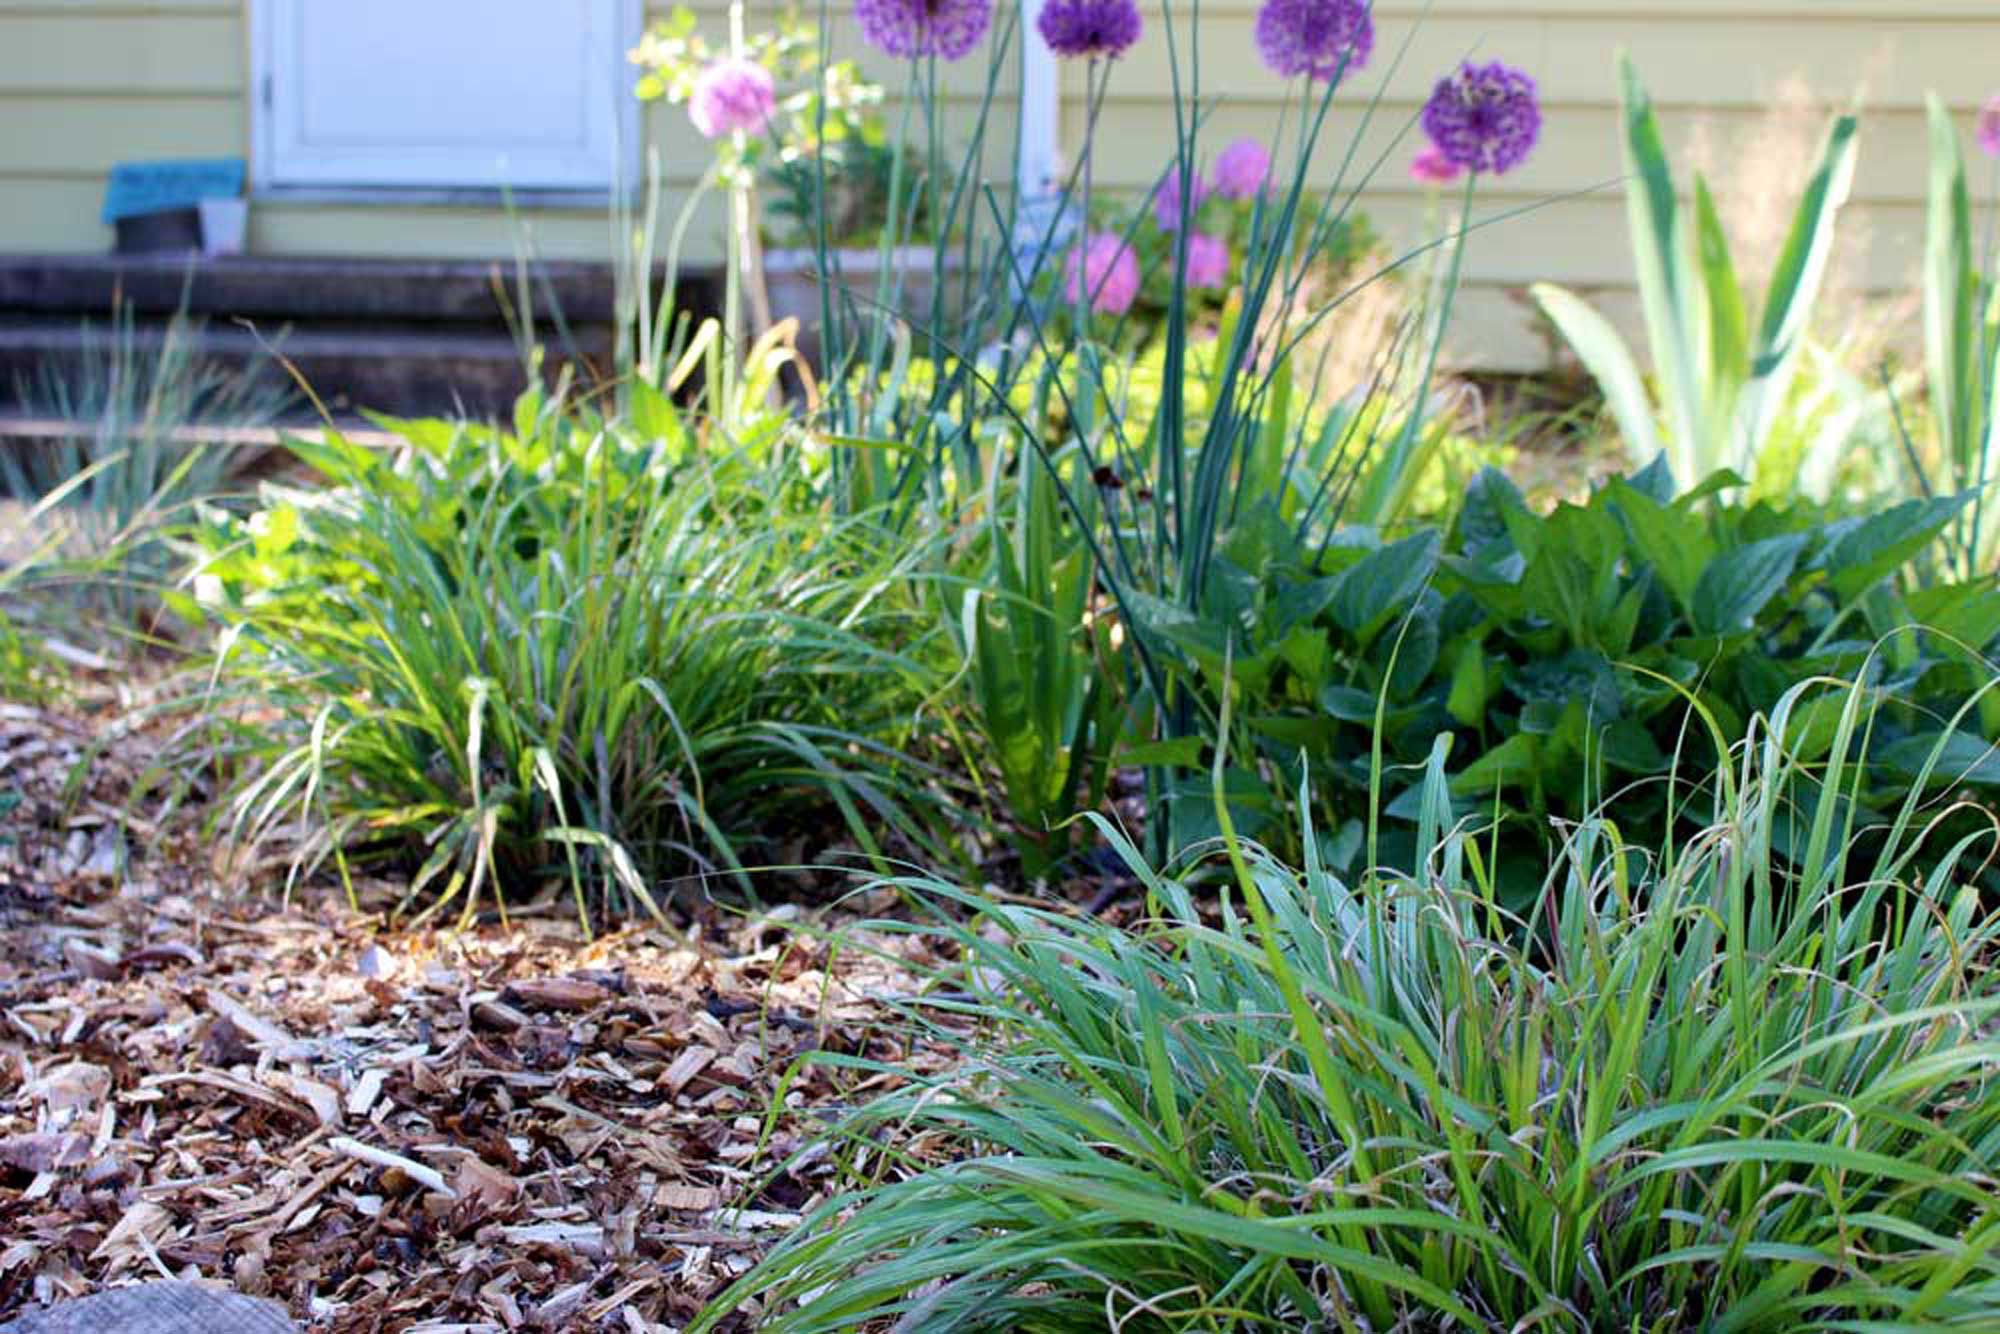 How to plant into a wood chip garden